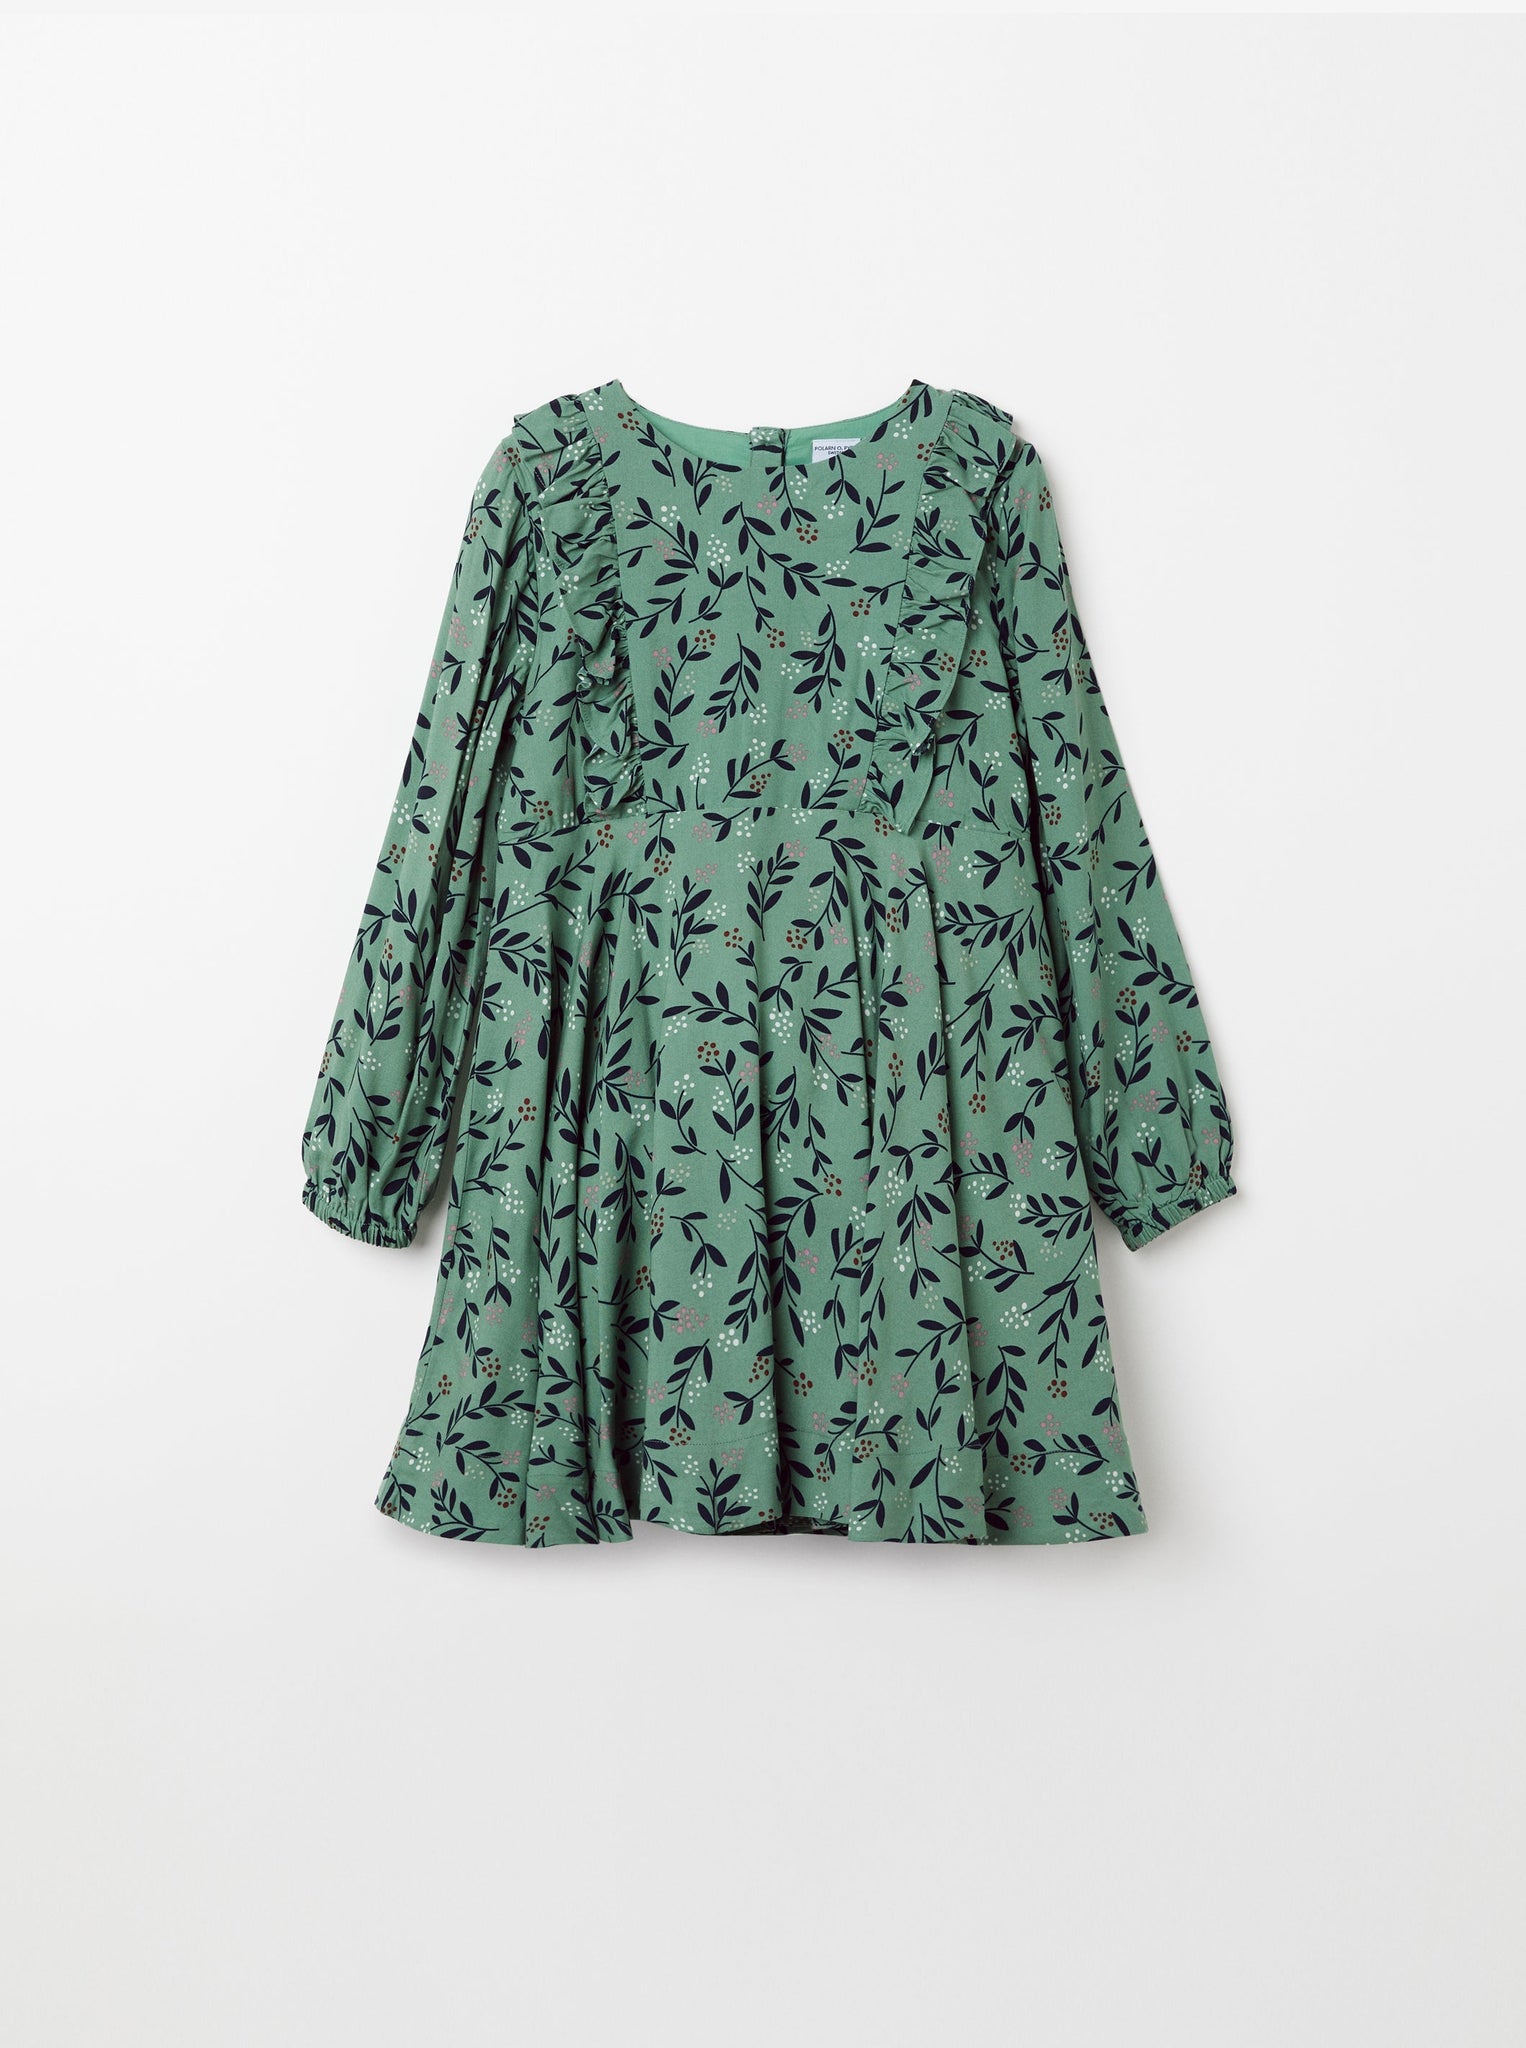 Leaf Print Green Kids Dress from the Polarn O. Pyret kidswear collection. Nordic kids clothes made from sustainable sources.